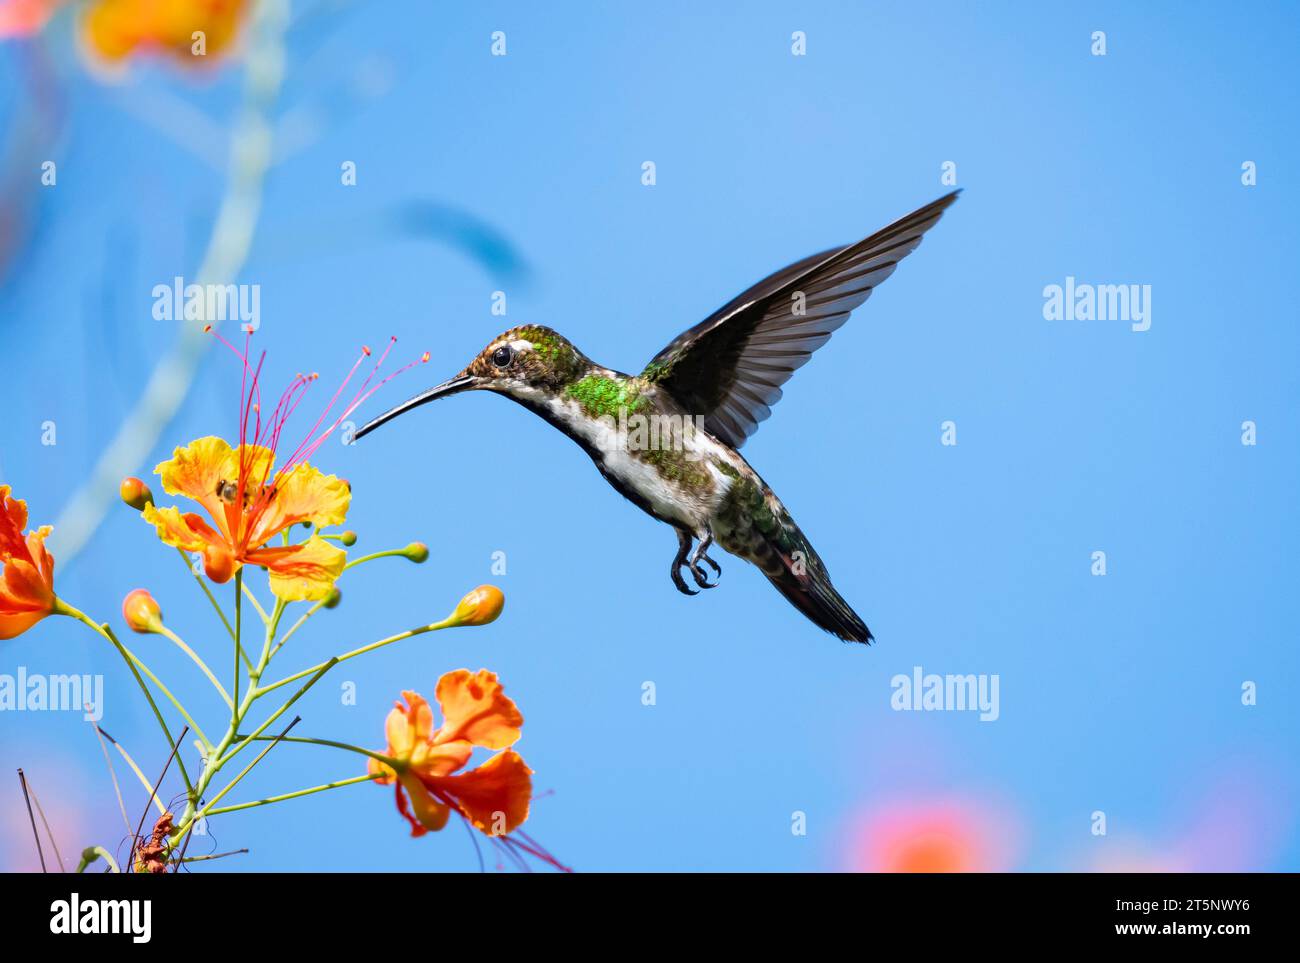 Bright, sunny photo of a Black-throated Mango hummingbird in flight with tropical orange flowers isolated in the blue sky Stock Photo